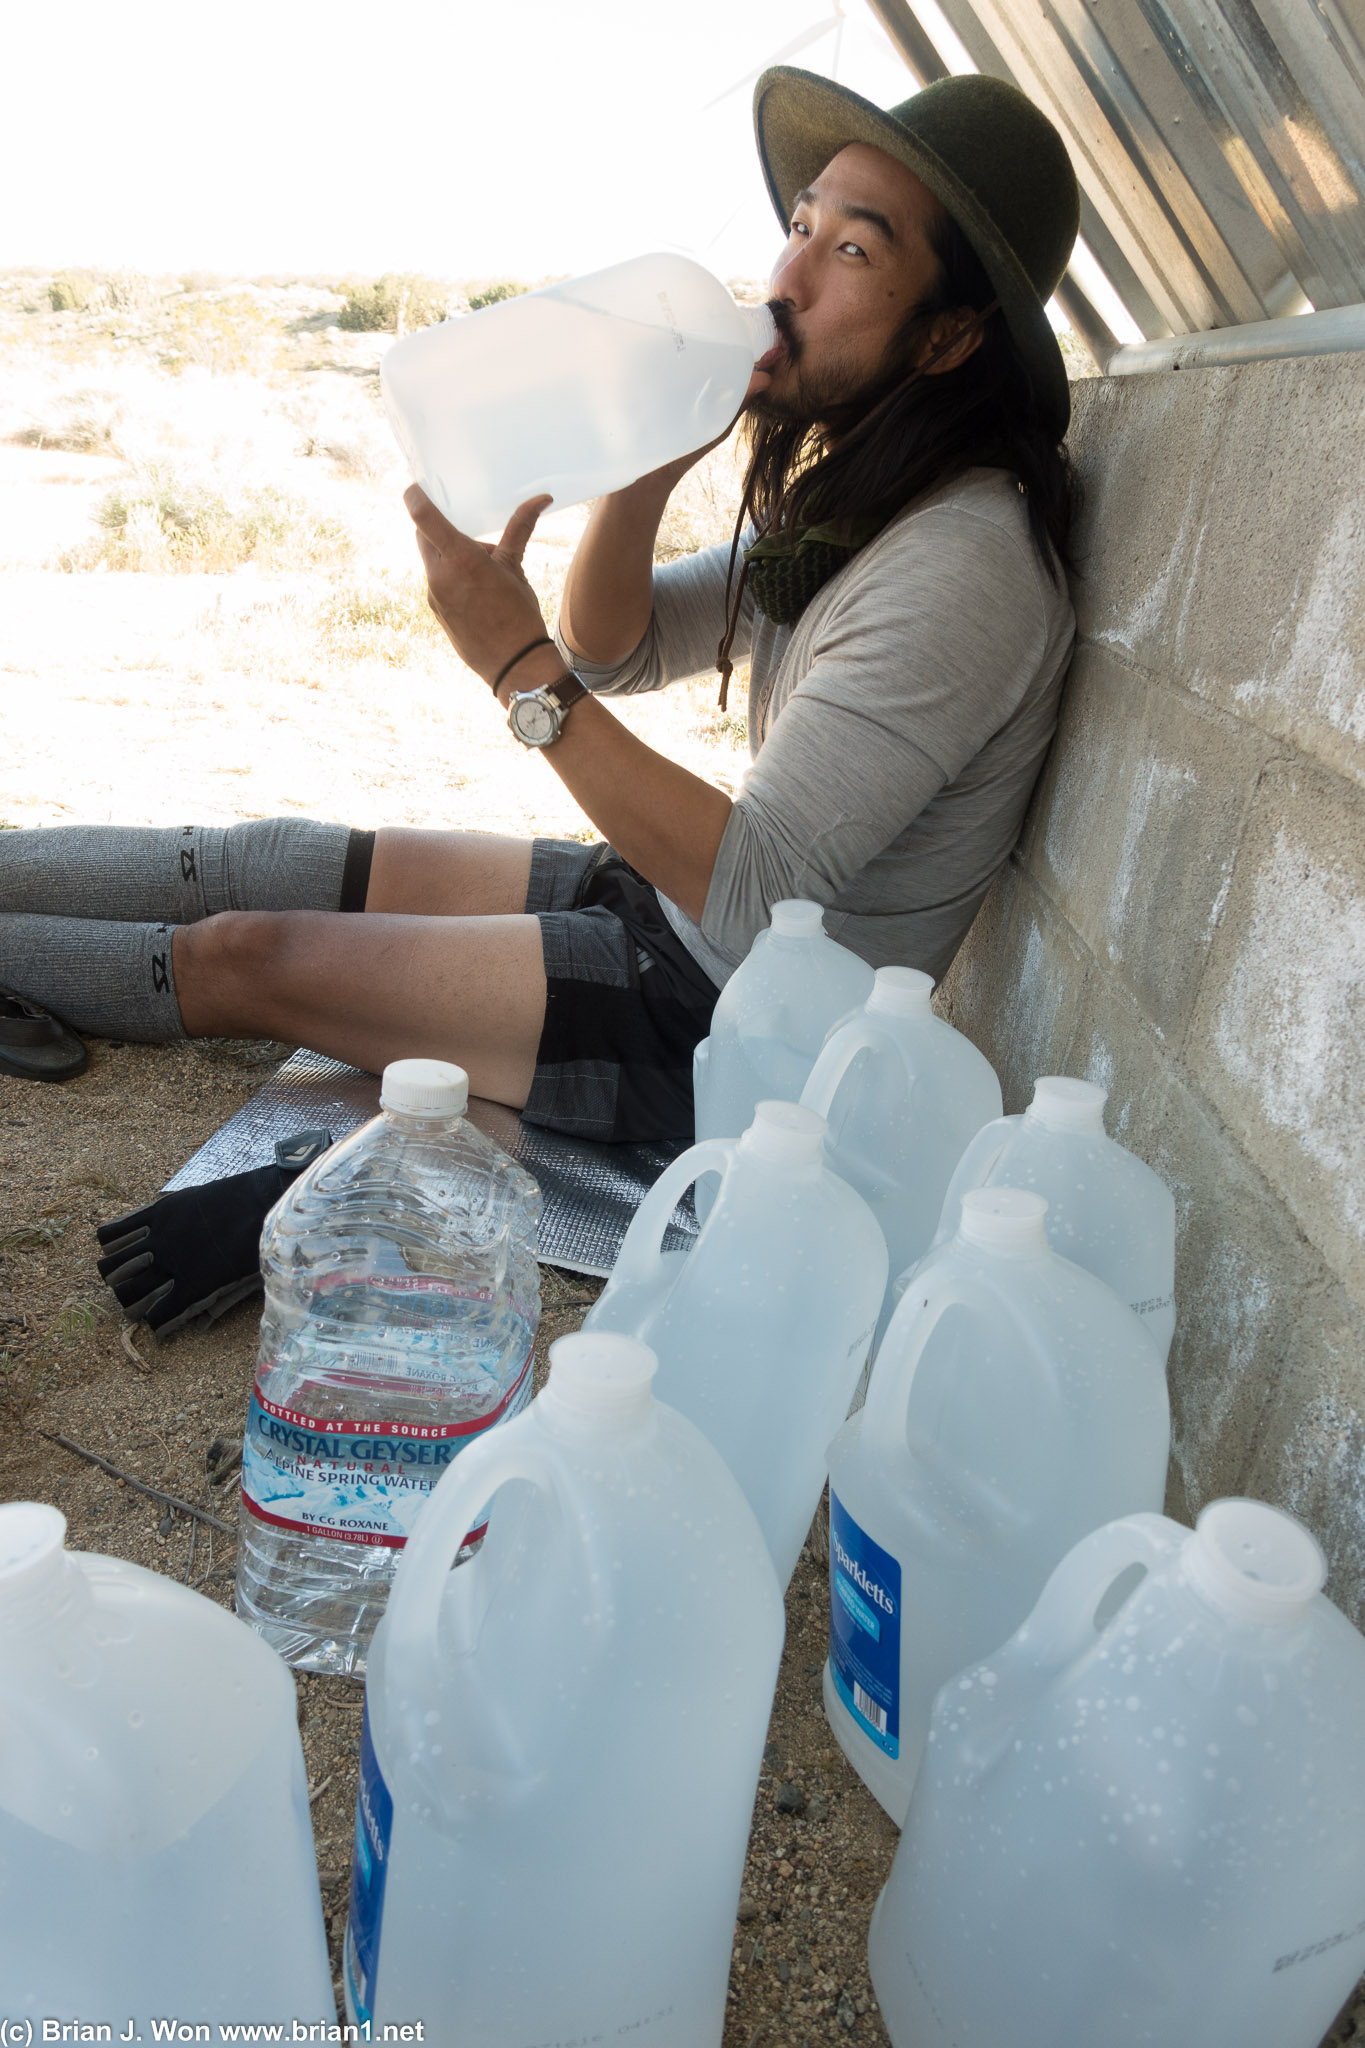 Living like kings of the desert with 10 gallons of water and a nice lean-to.